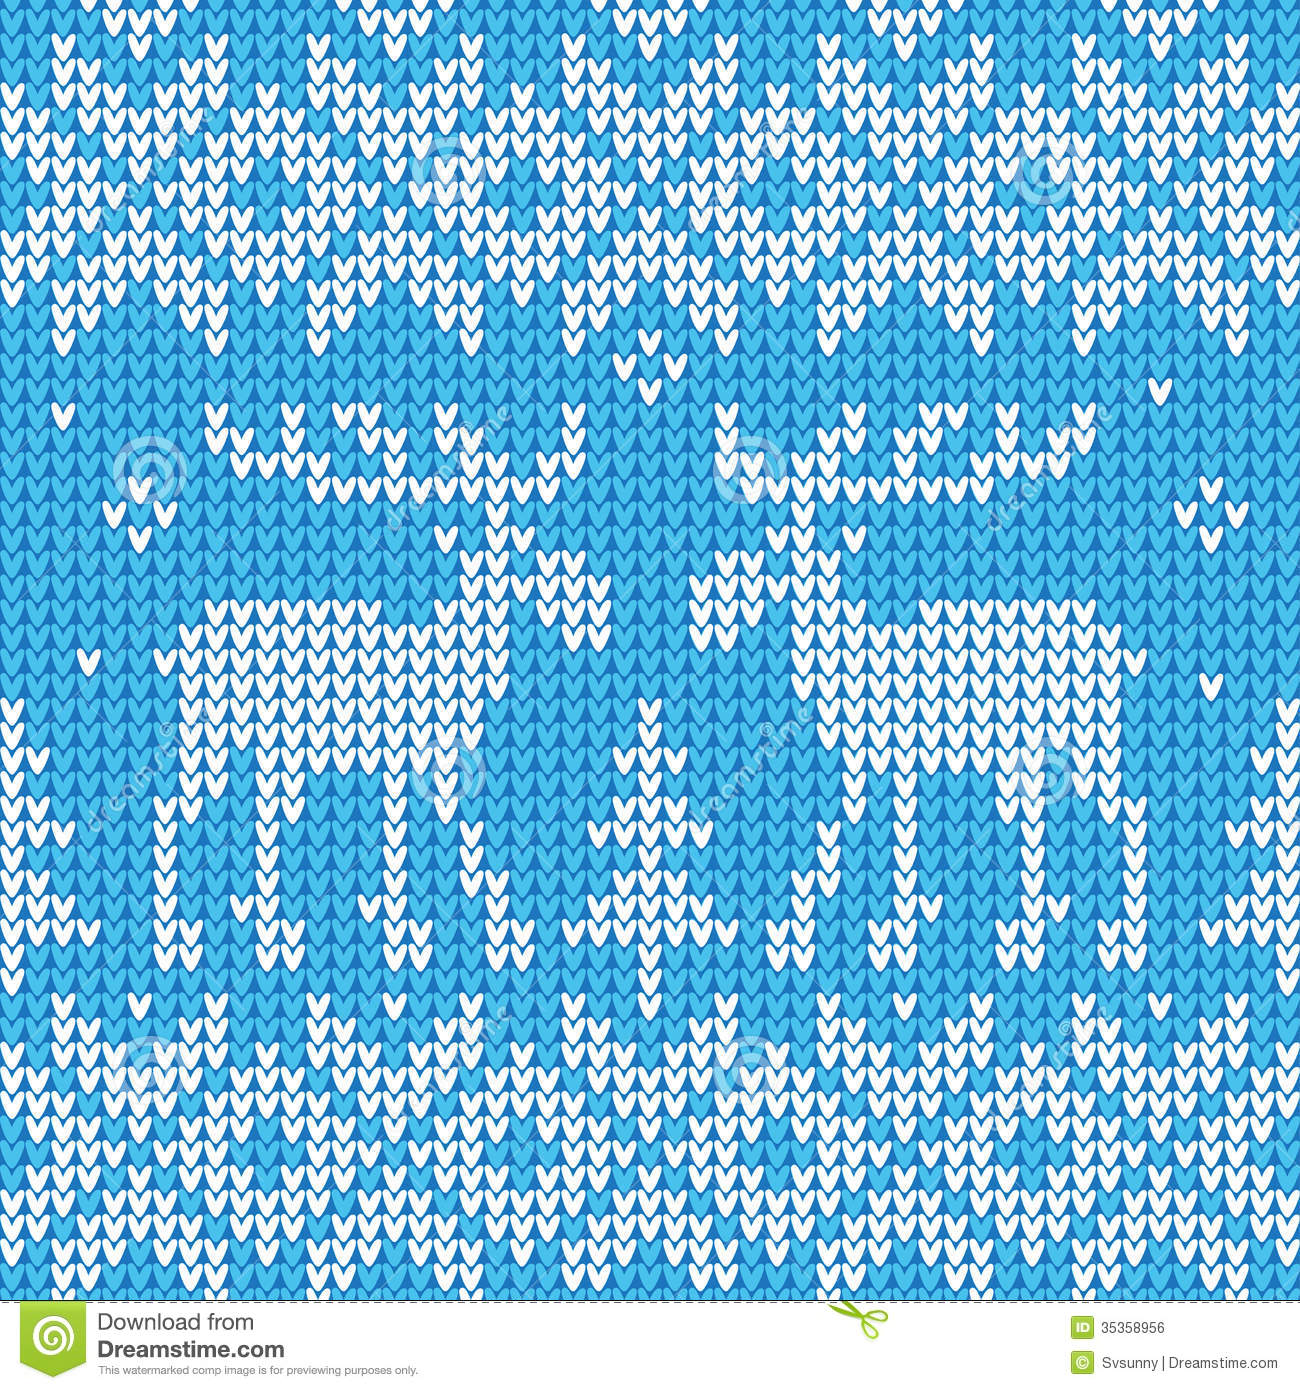 Knitted Seamless Pattern Vector Free